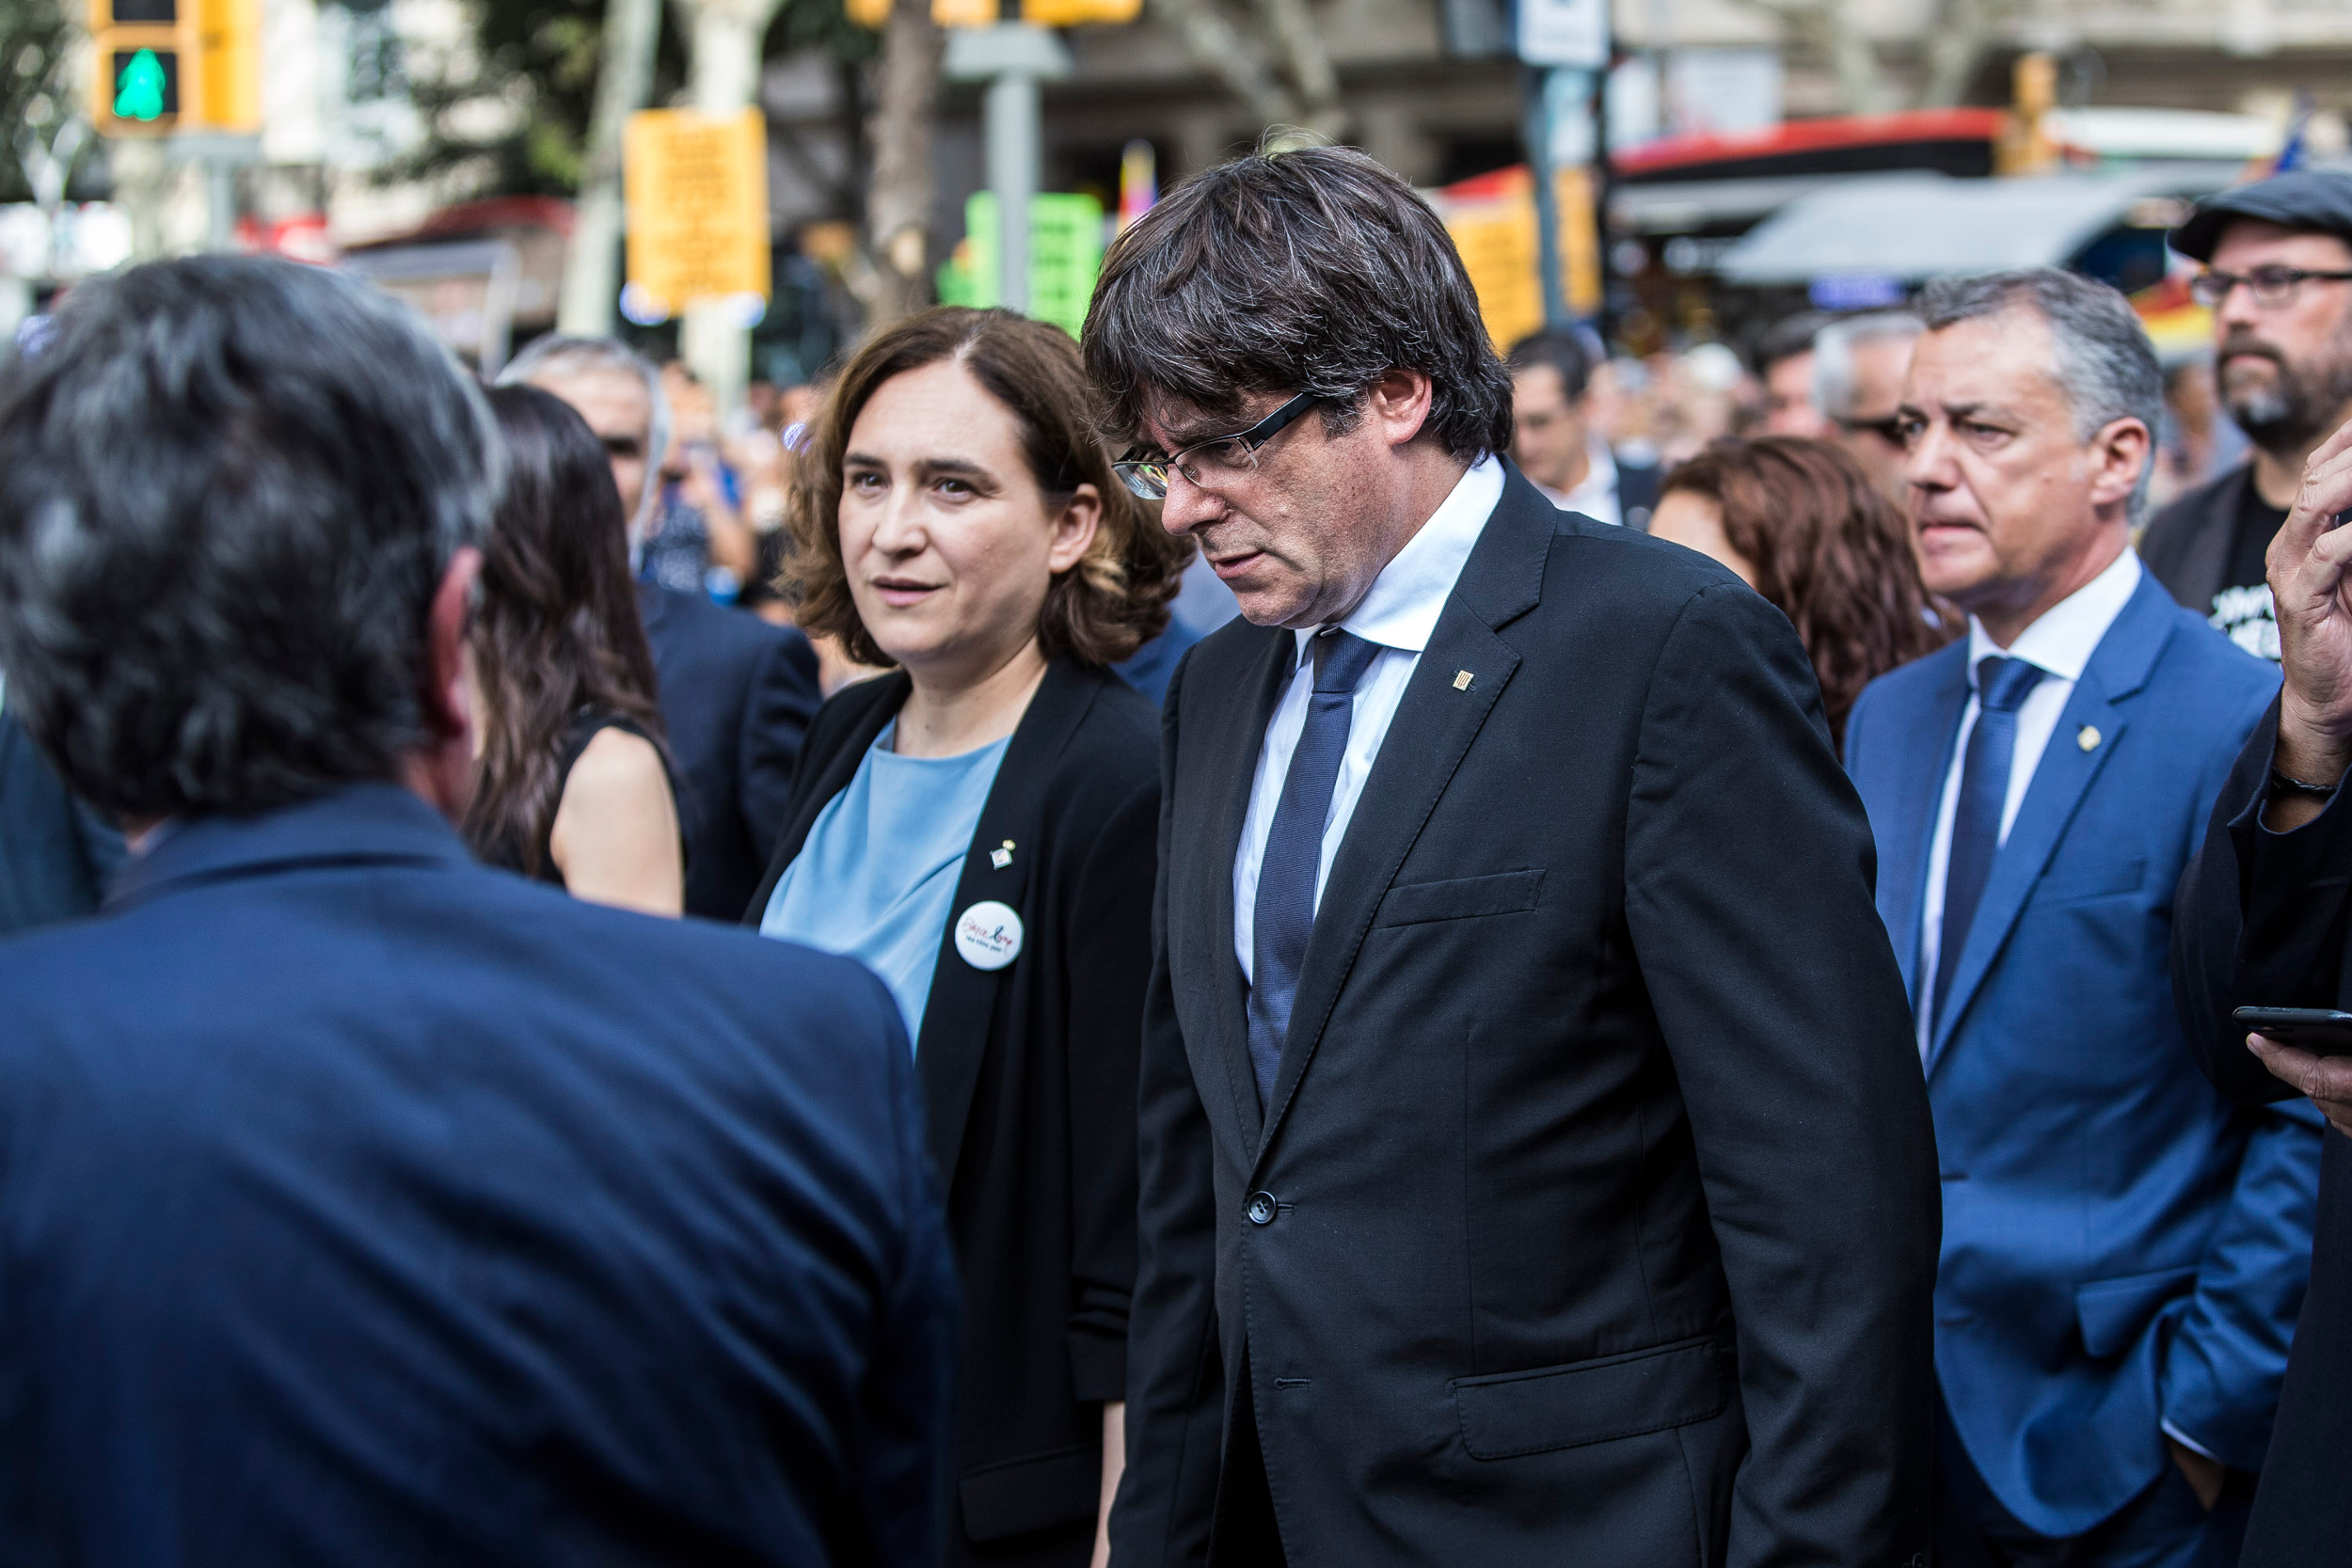 Barcelona mayor Ada Colau and Catalan president Carles Puigdemont at the anti-terror march on August 26 (by ACN)